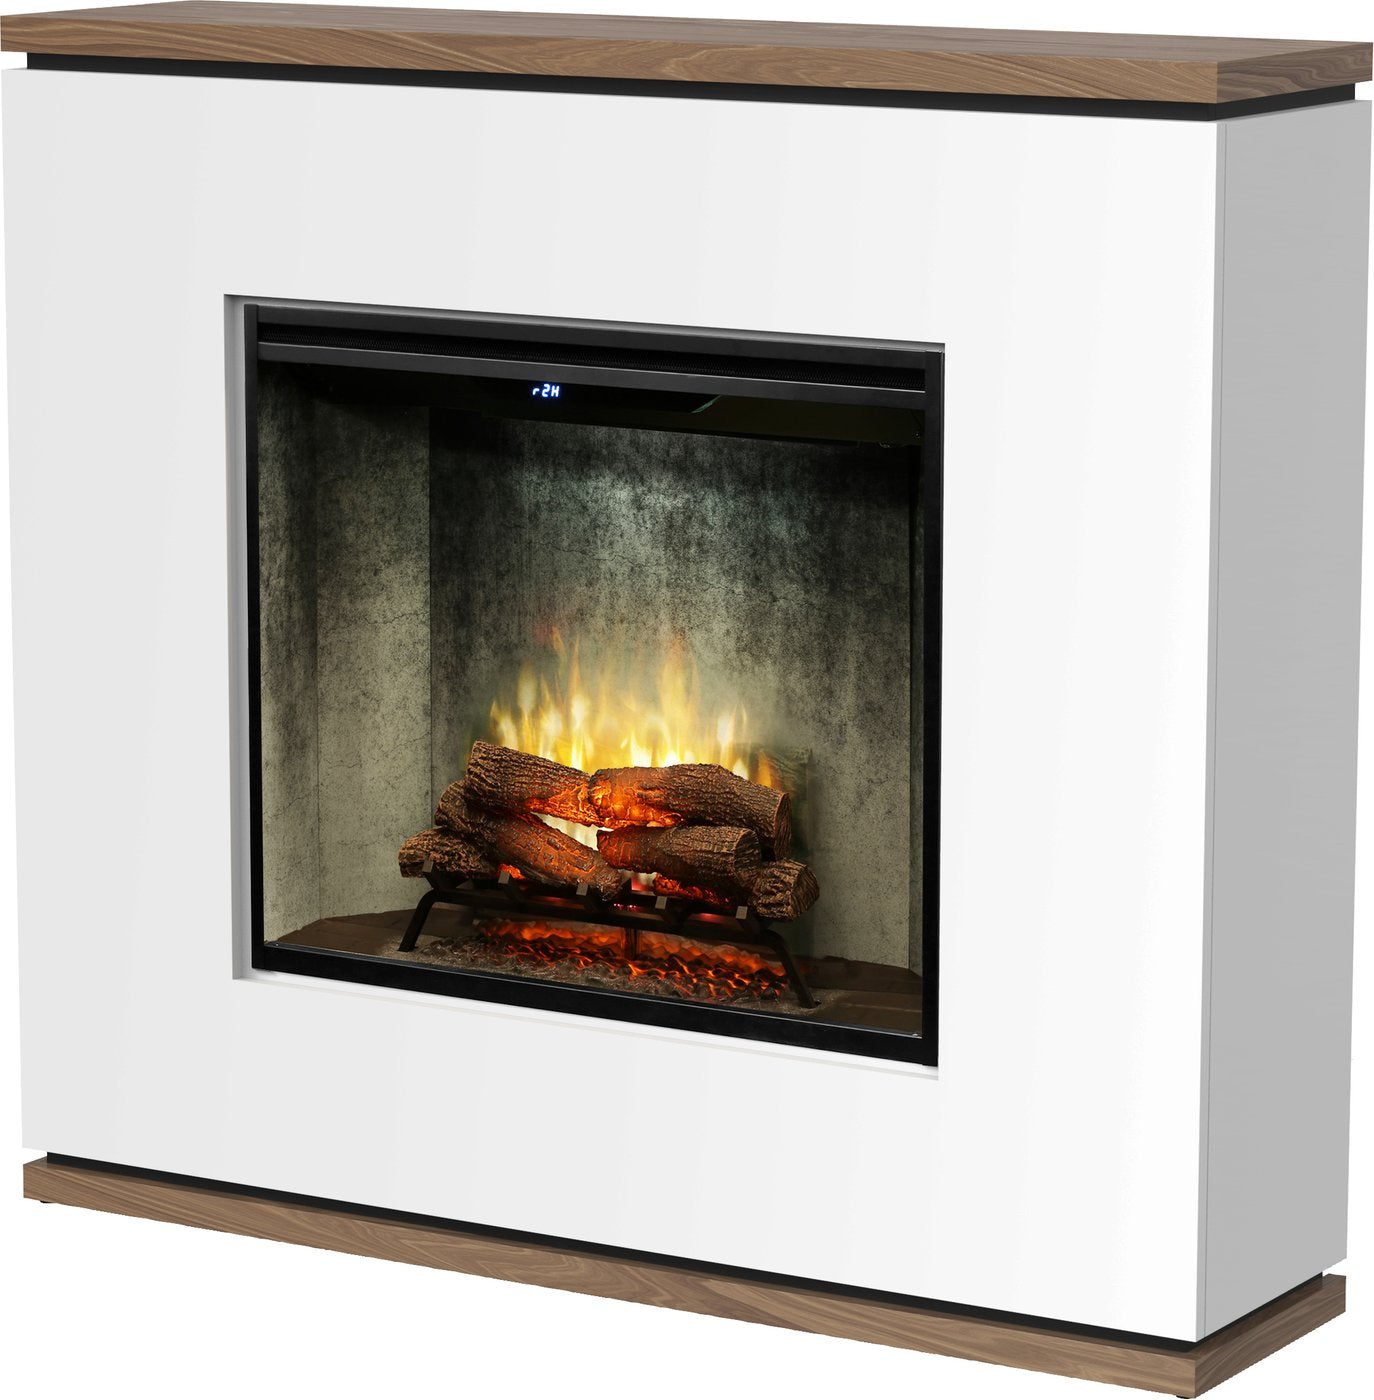 Dimplex 2kW Strata Mantle with 30 inch Revillusion Firebox in White and Walnut Veneer Finish